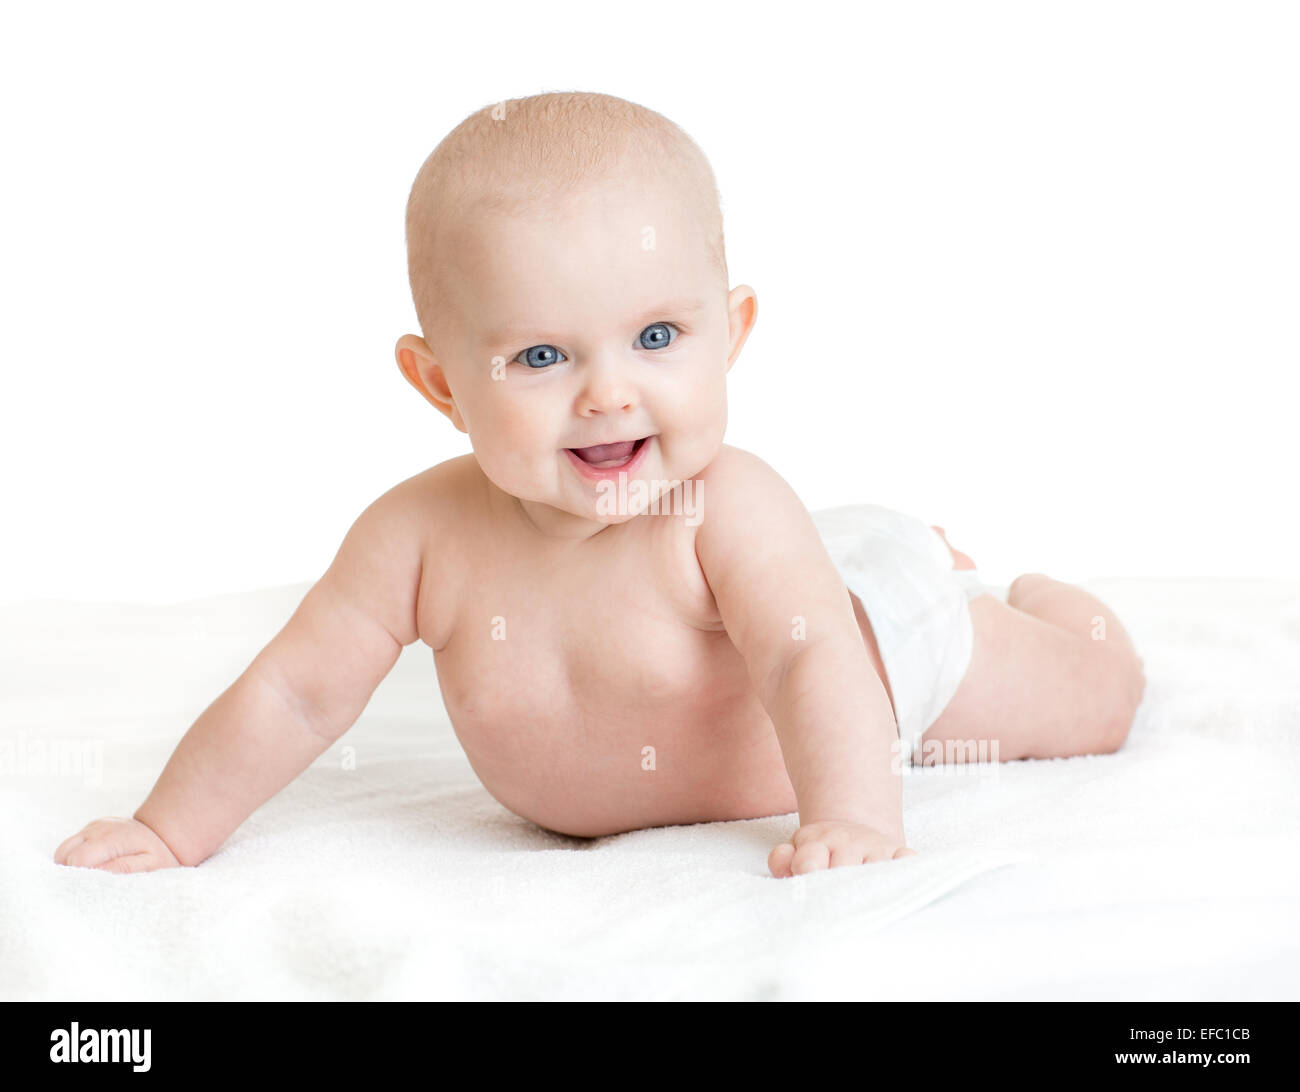 Cute smiling baby lying on serviette blanche dans nappy Banque D'Images